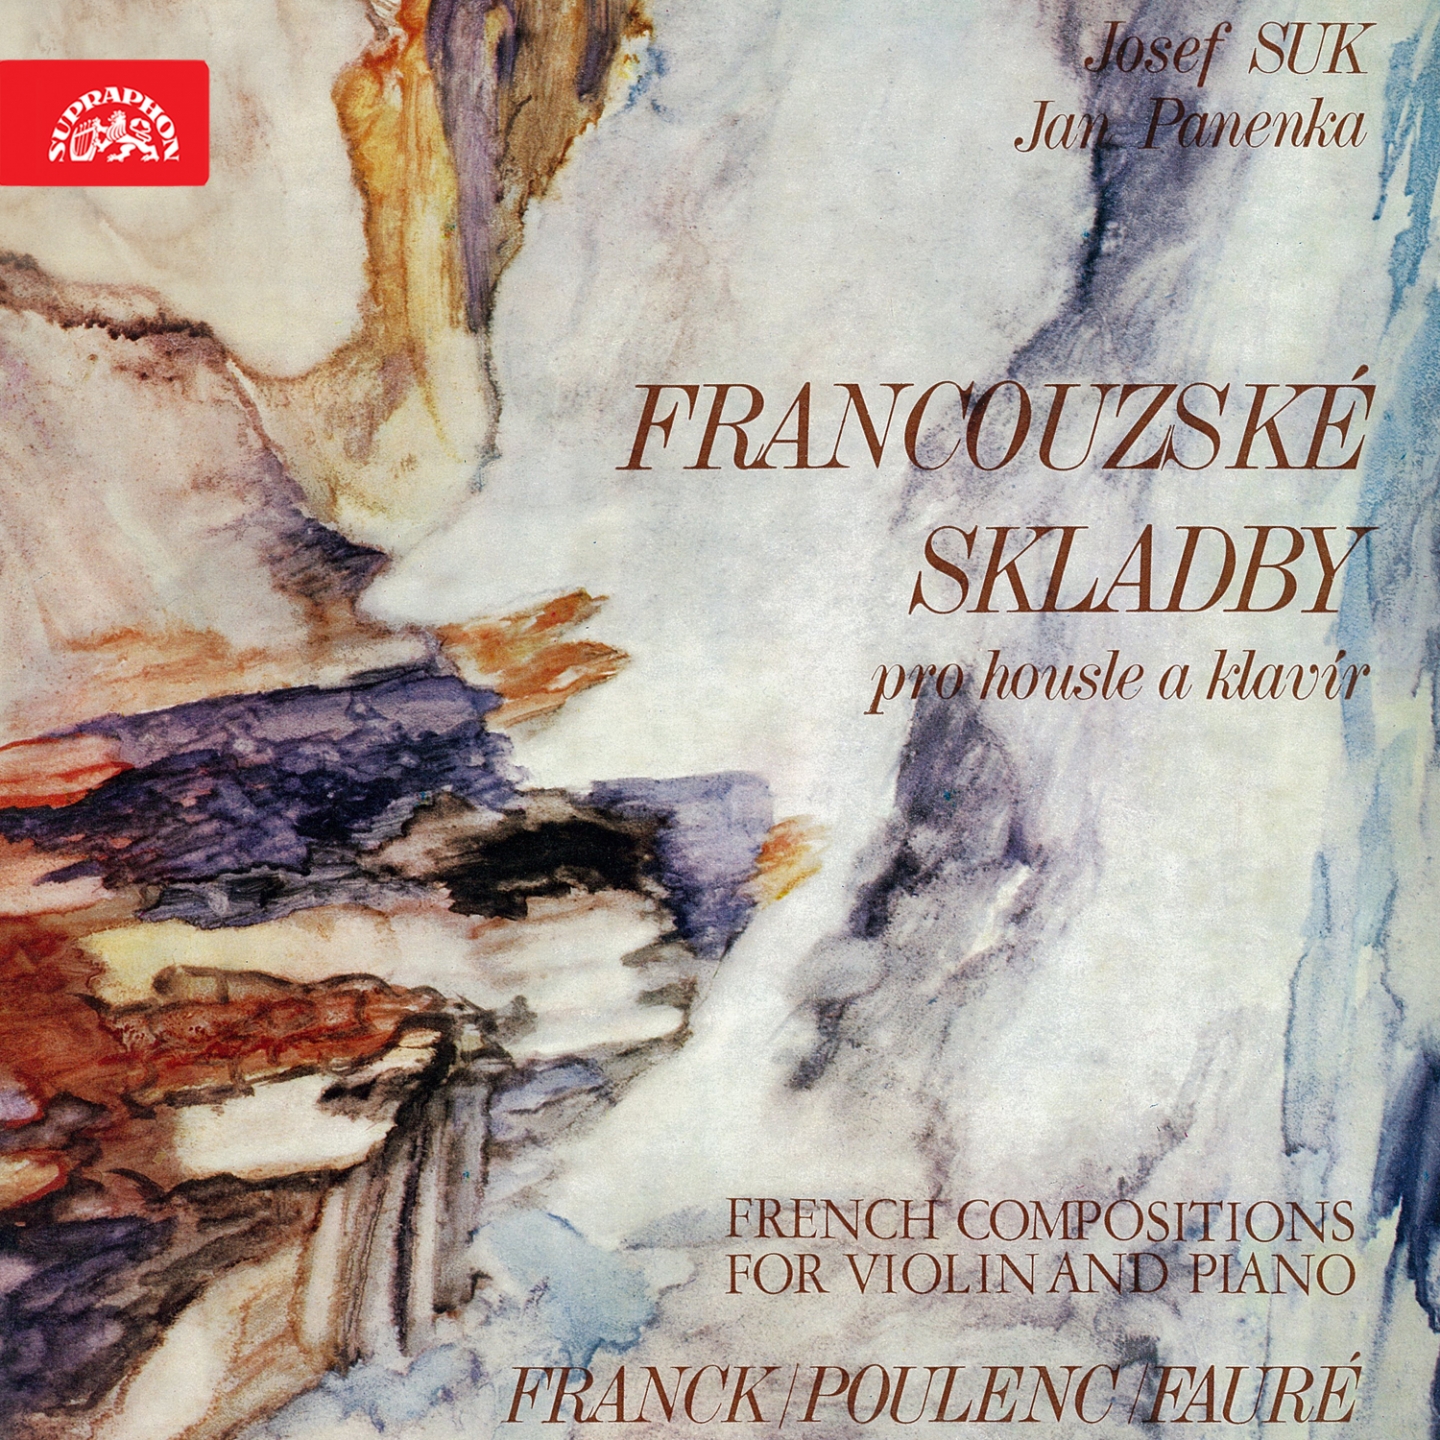 Franck, Poulenc, Faure: French Works for Violin and Piano